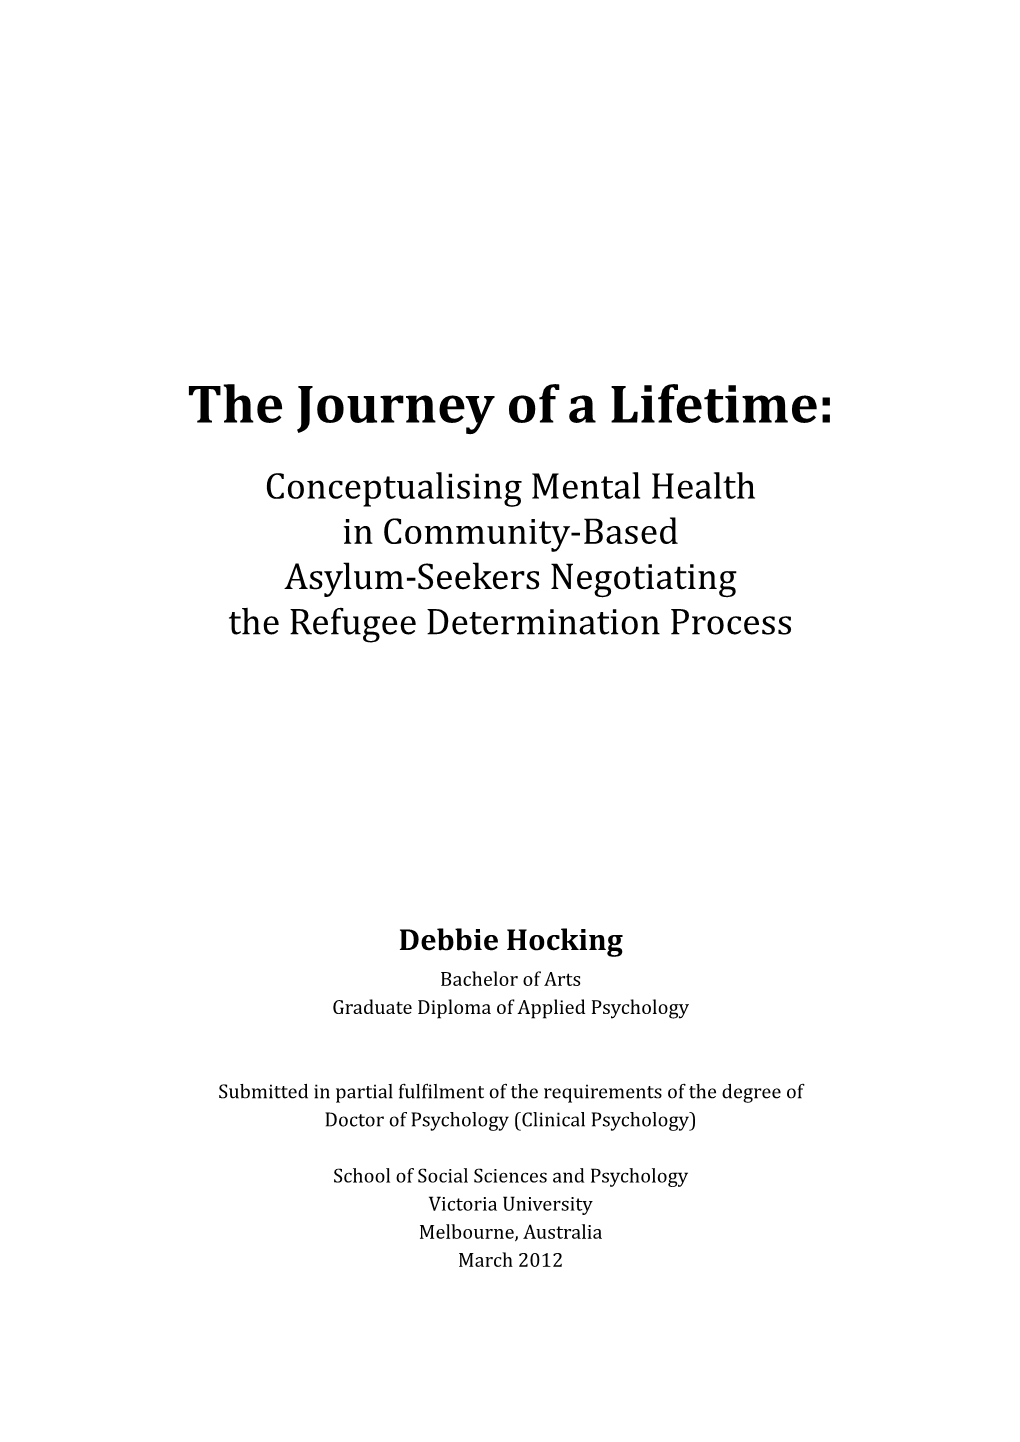 The Journey of a Lifetime: Conceptualising Mental Health in Community-Based Asylum-Seekers Negotiating the Refugee Determination Process